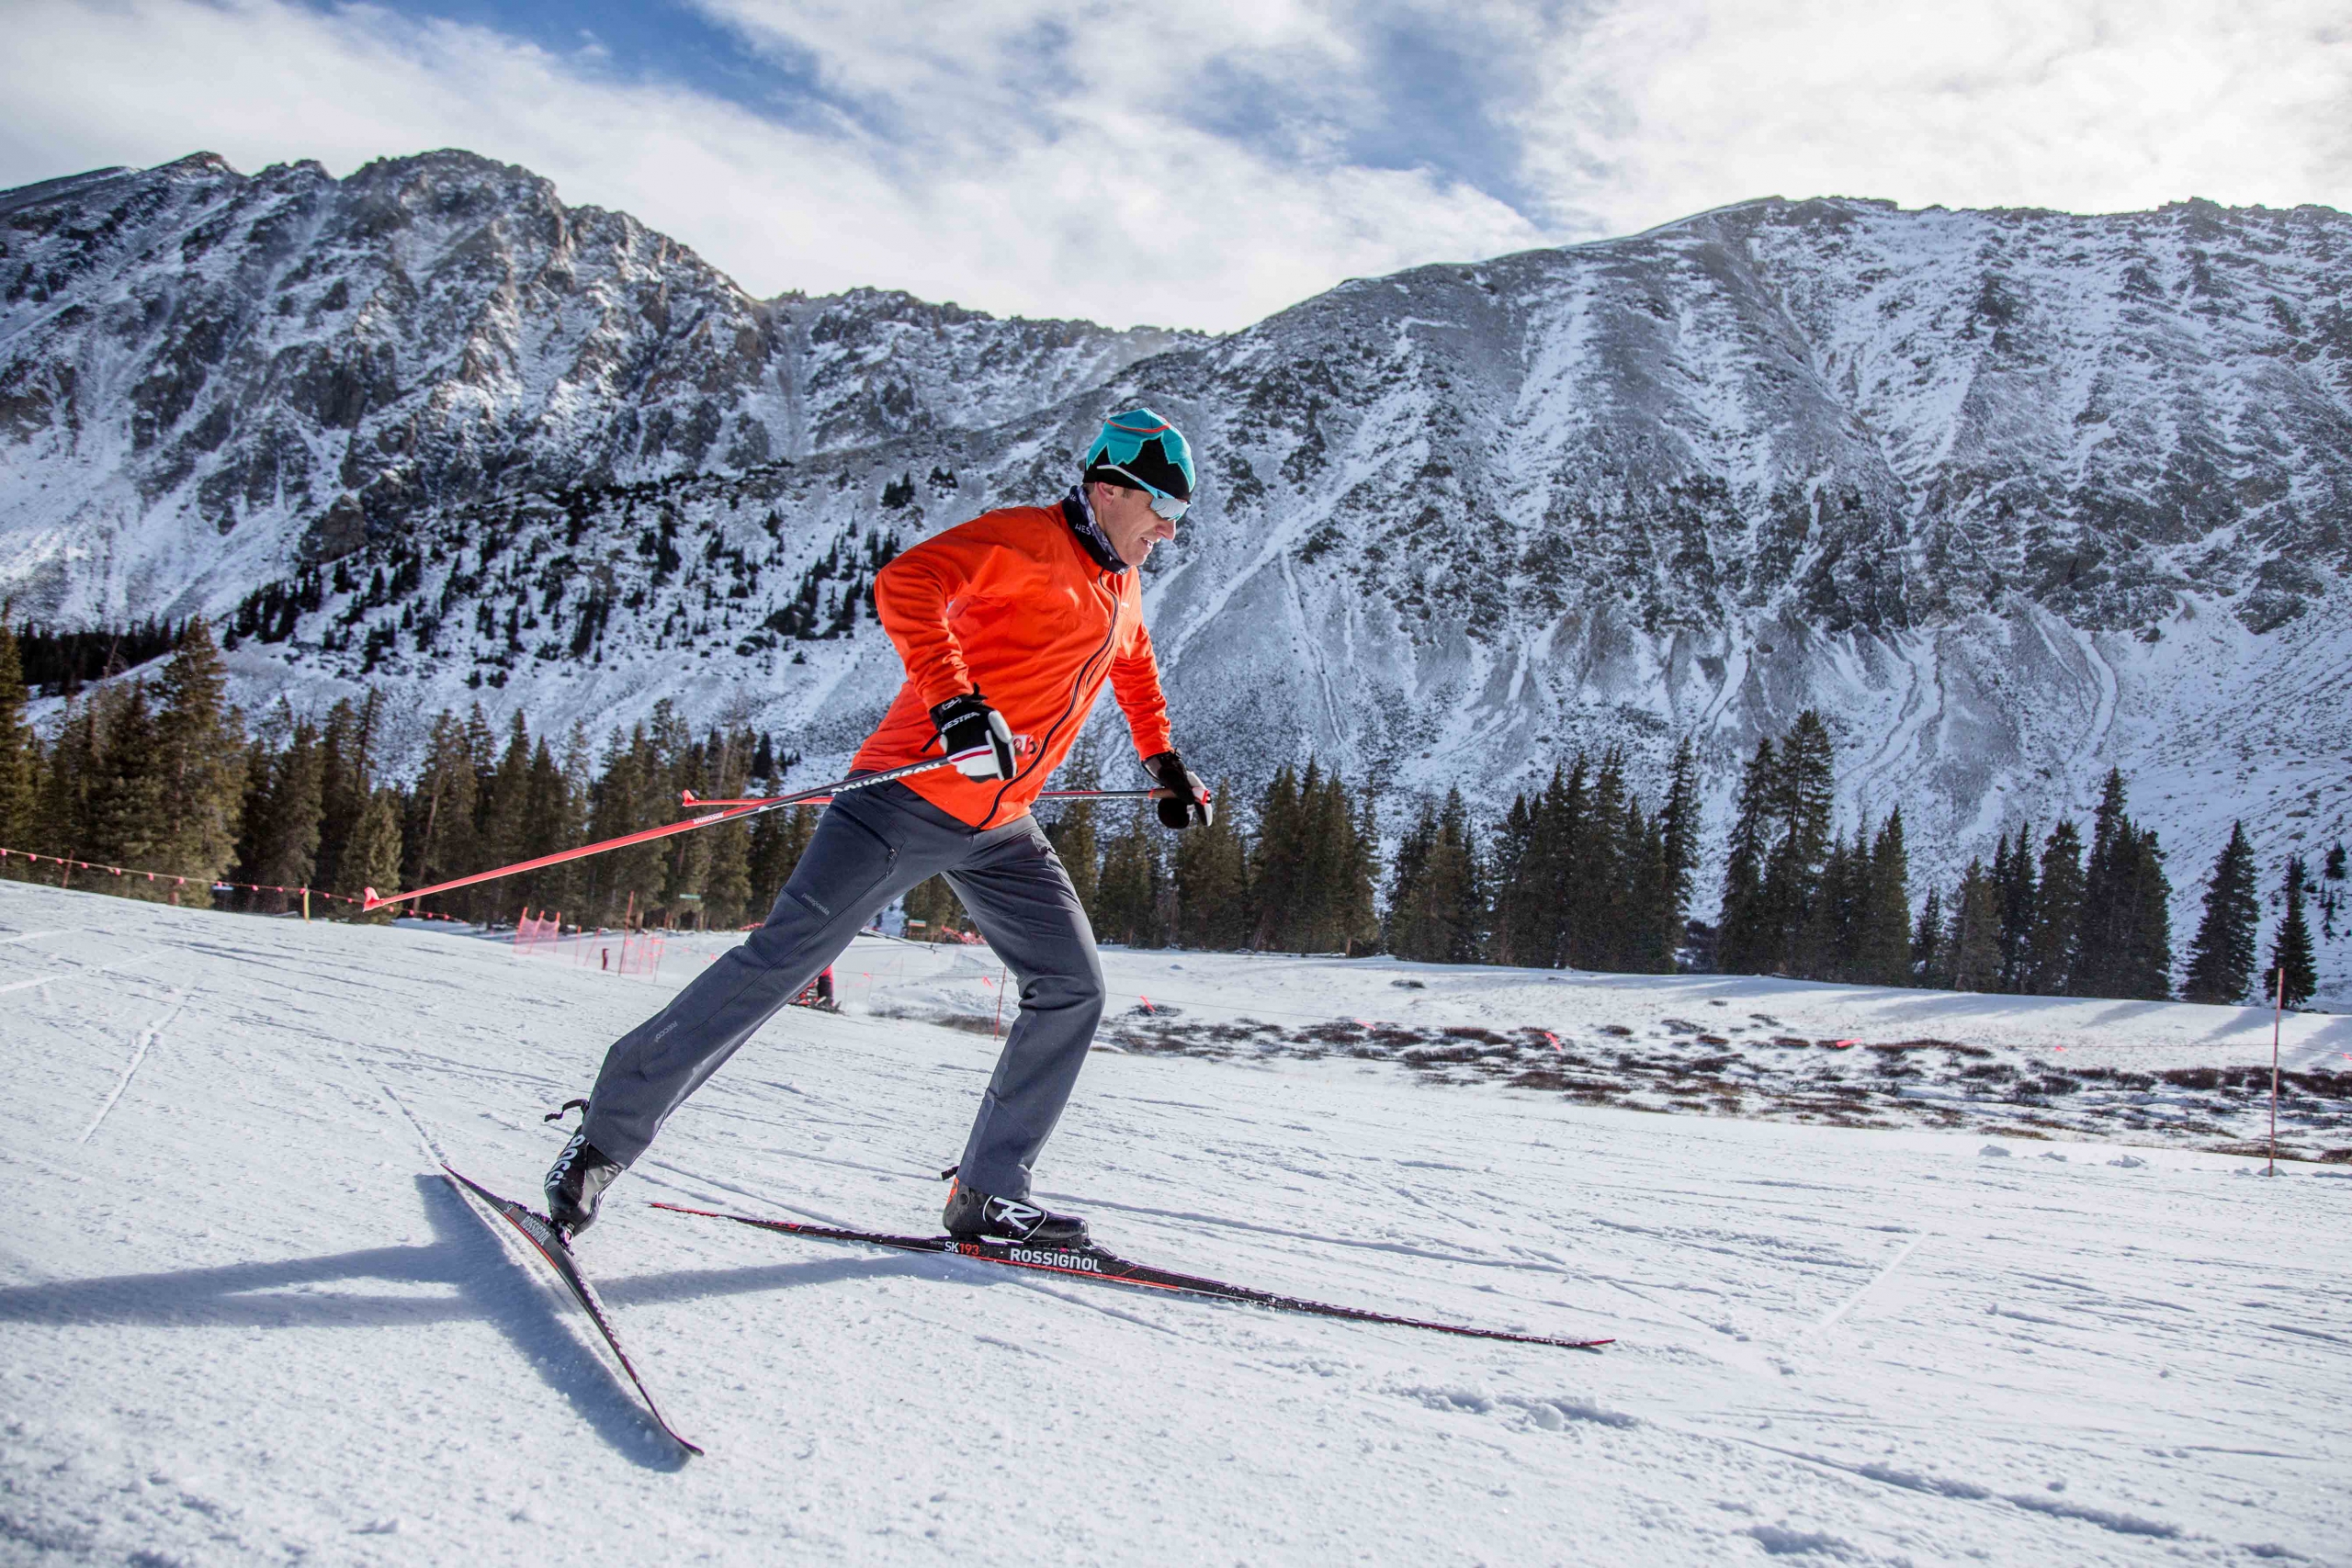 PSIA-AASI National Team member Greg Rhodes skate skis in front of the A-Basin East Wall